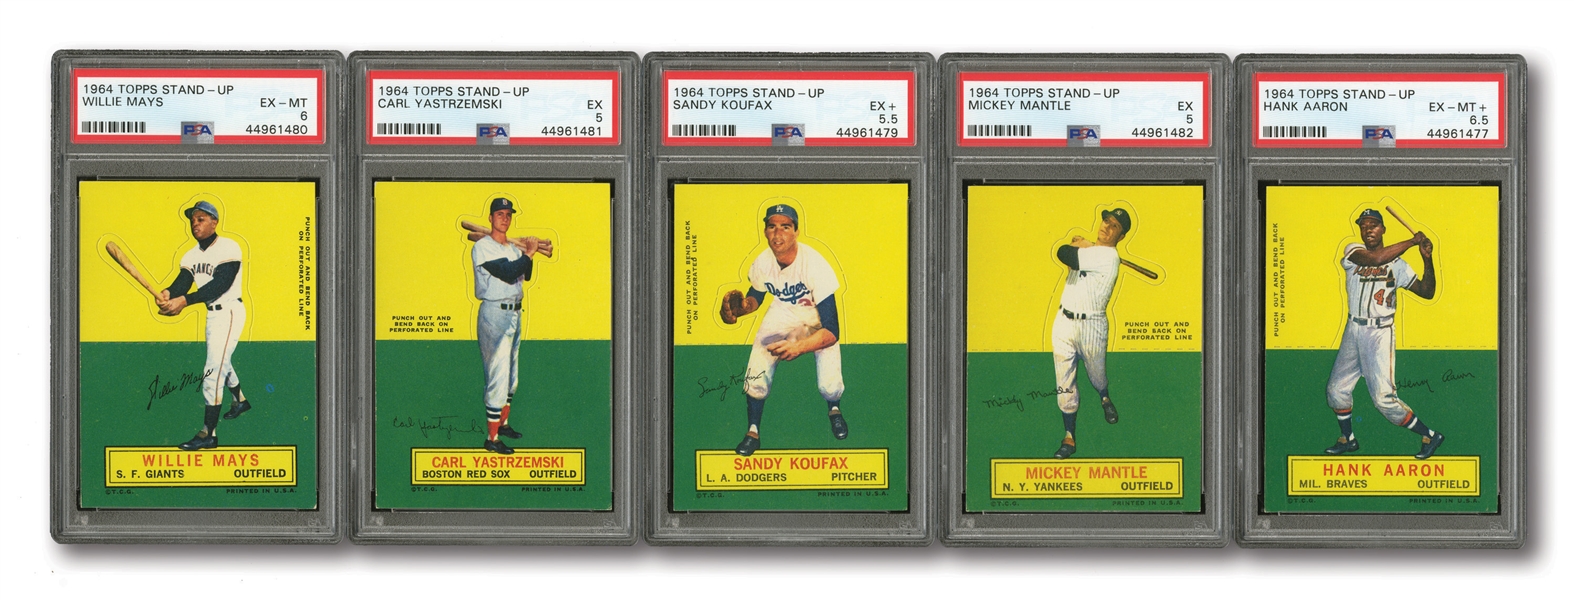 1964 TOPPS STAND-UP COMPLETE SET OF (77) WITH PSA GRADED MANTLE, MAYS, AARON, YAZ & KOUFAX